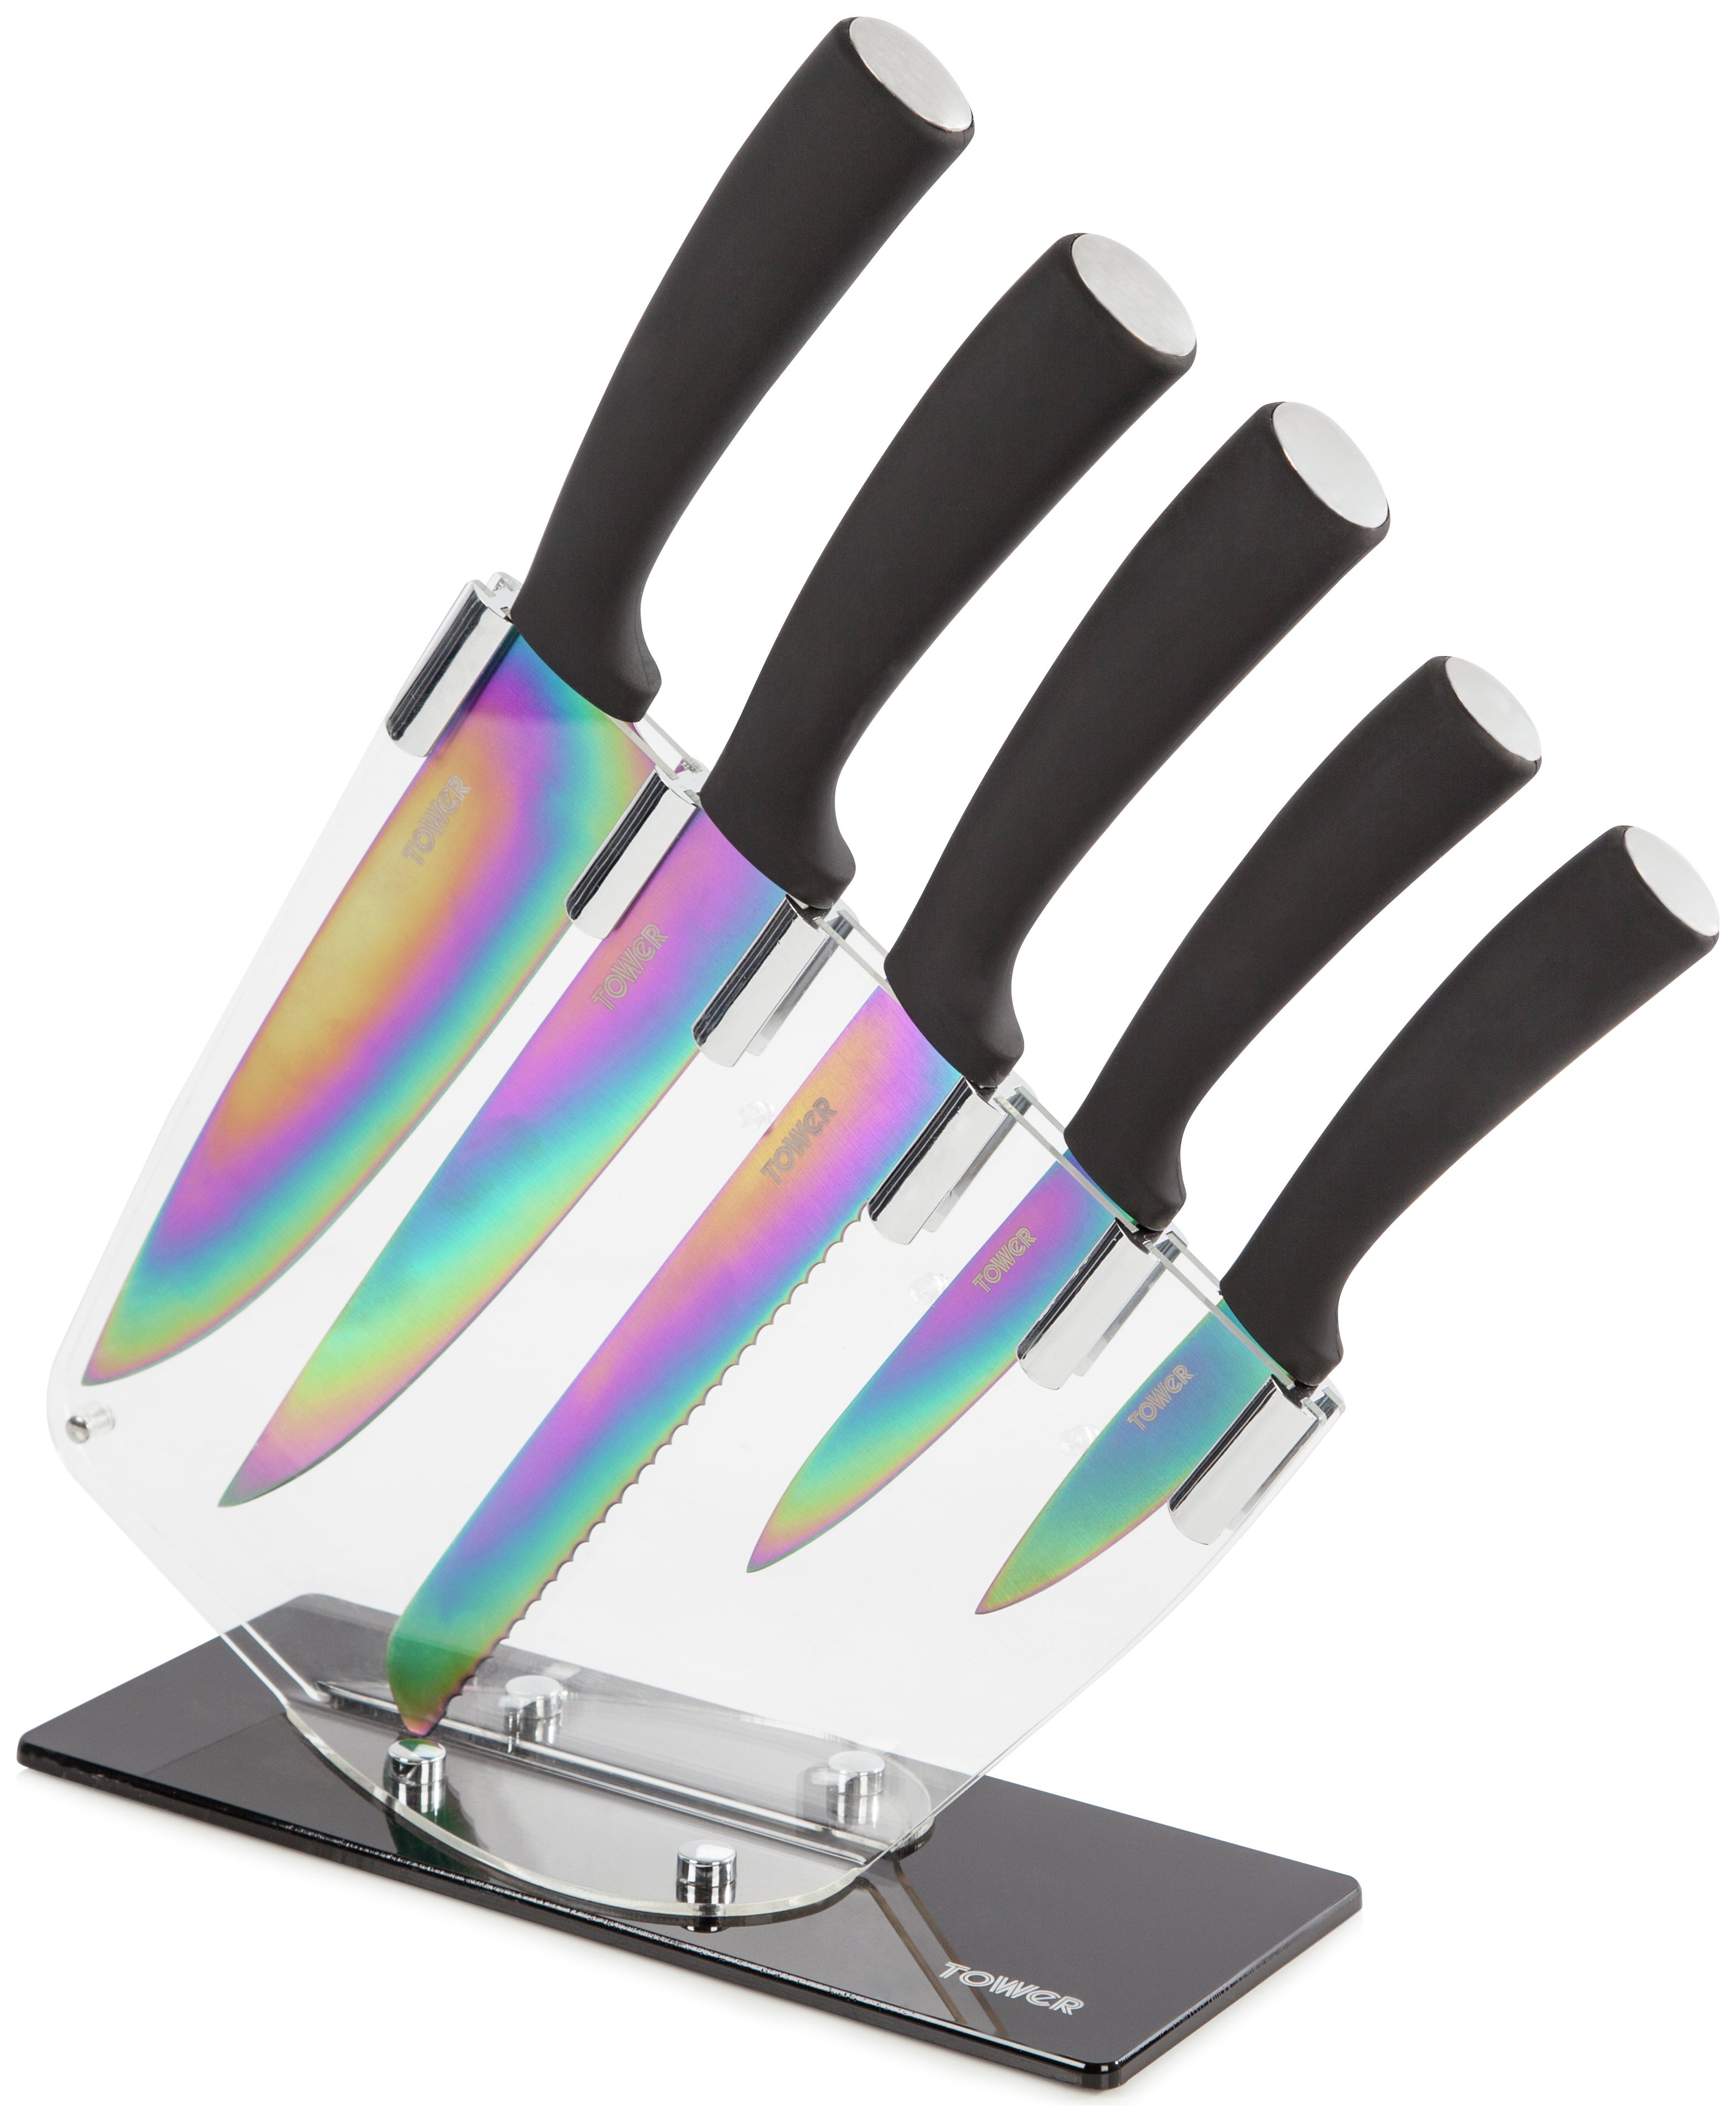 Tower 5 Piece Knife Set with Acrylic Stand.